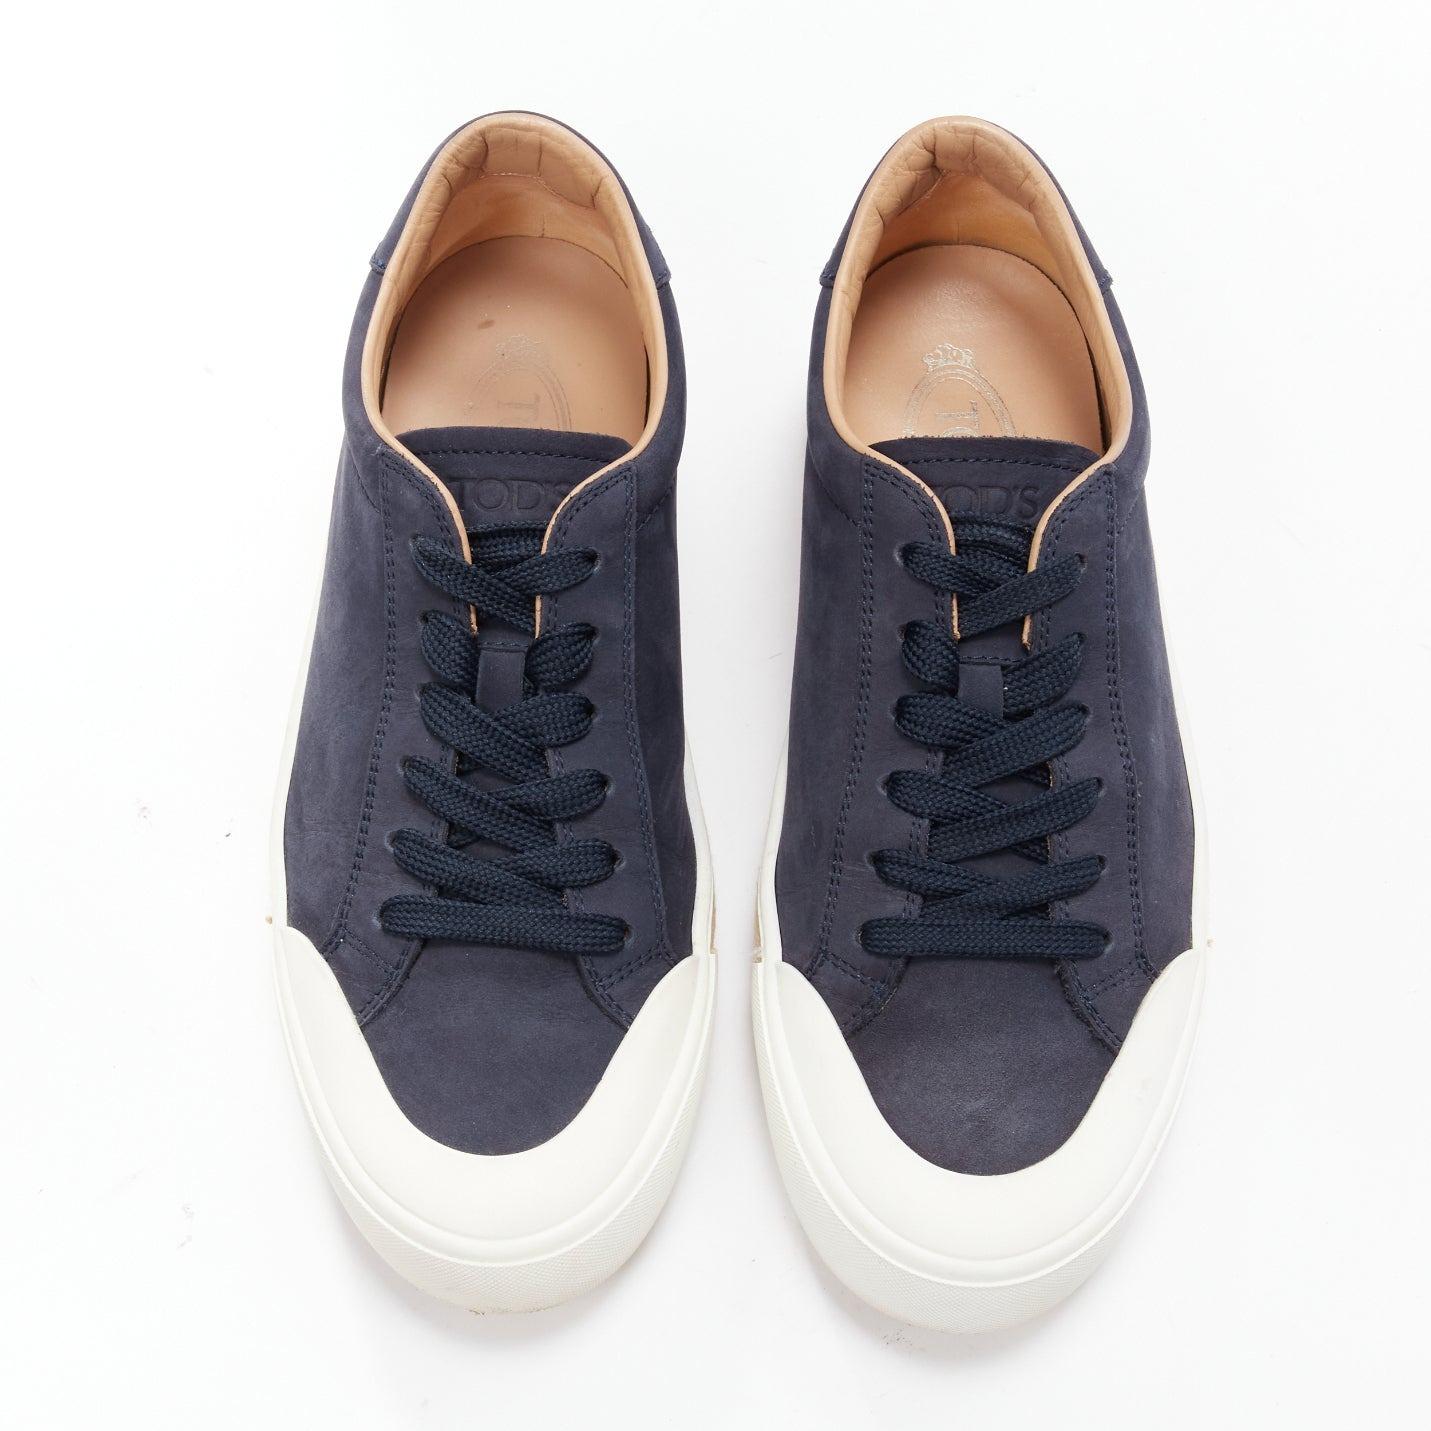 TOD'S navy suede leather espadrille sole low top sneakers UK7.5 EU41.5
Reference: JSLE/A00093
Brand: Tod's
Material: Leather
Color: Navy, White
Pattern: Solid
Closure: Lace Up
Lining: Nude Leather
Extra Details: Logo at back.
Made in: